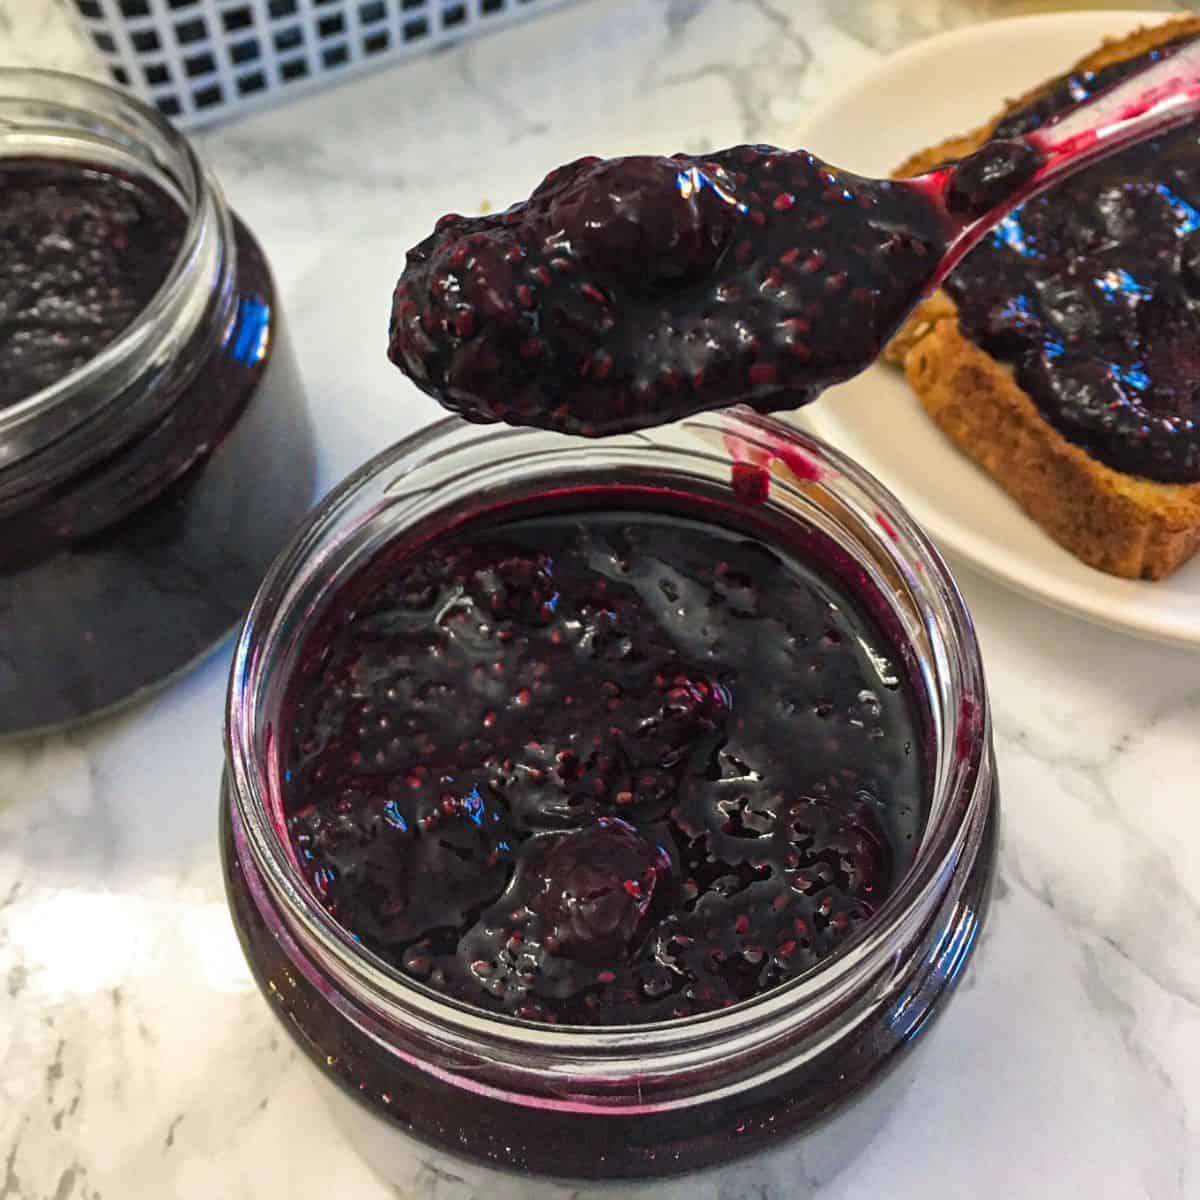 Spoonful of blueberry jam being held above jar of jam.